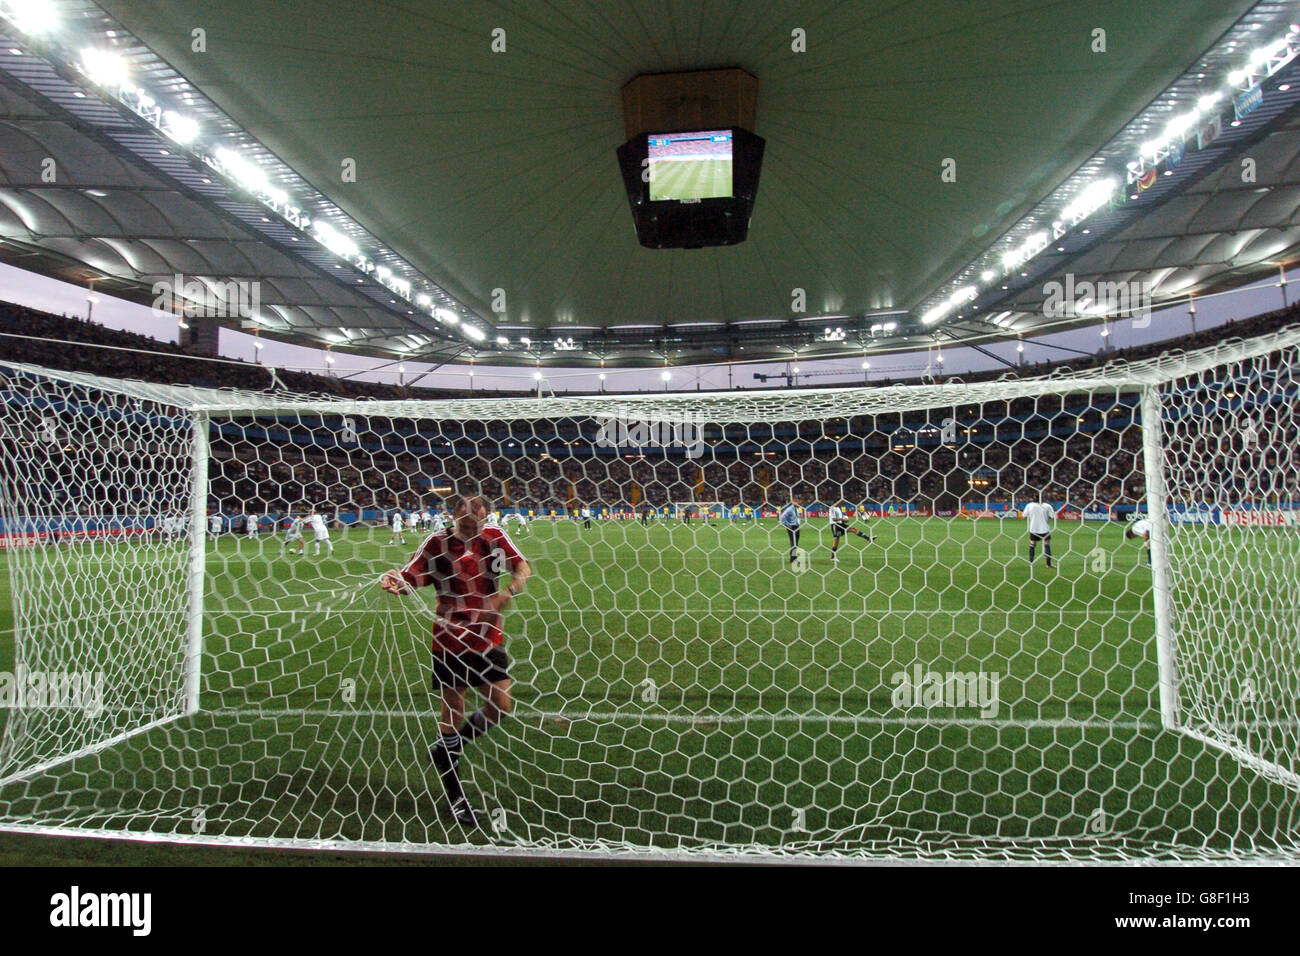 Soccer - FIFA Confederations Cup 2005 - Final - Brazil v Argentina - Commerzbank-Arena. A general view of the Commerzbank-Arena Stock Photo